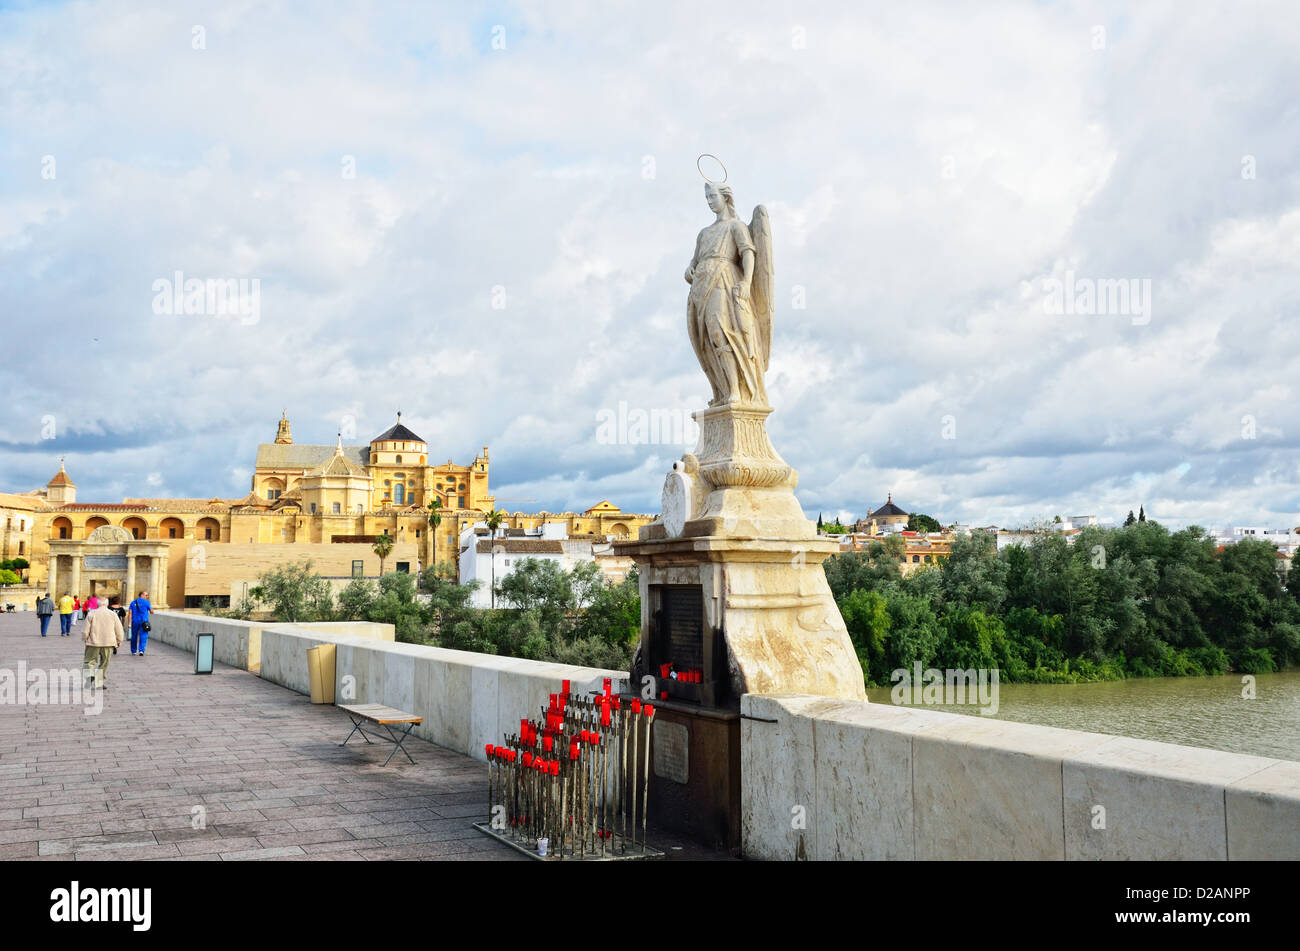 Place of worship outdoors in Cordoba Stock Photo